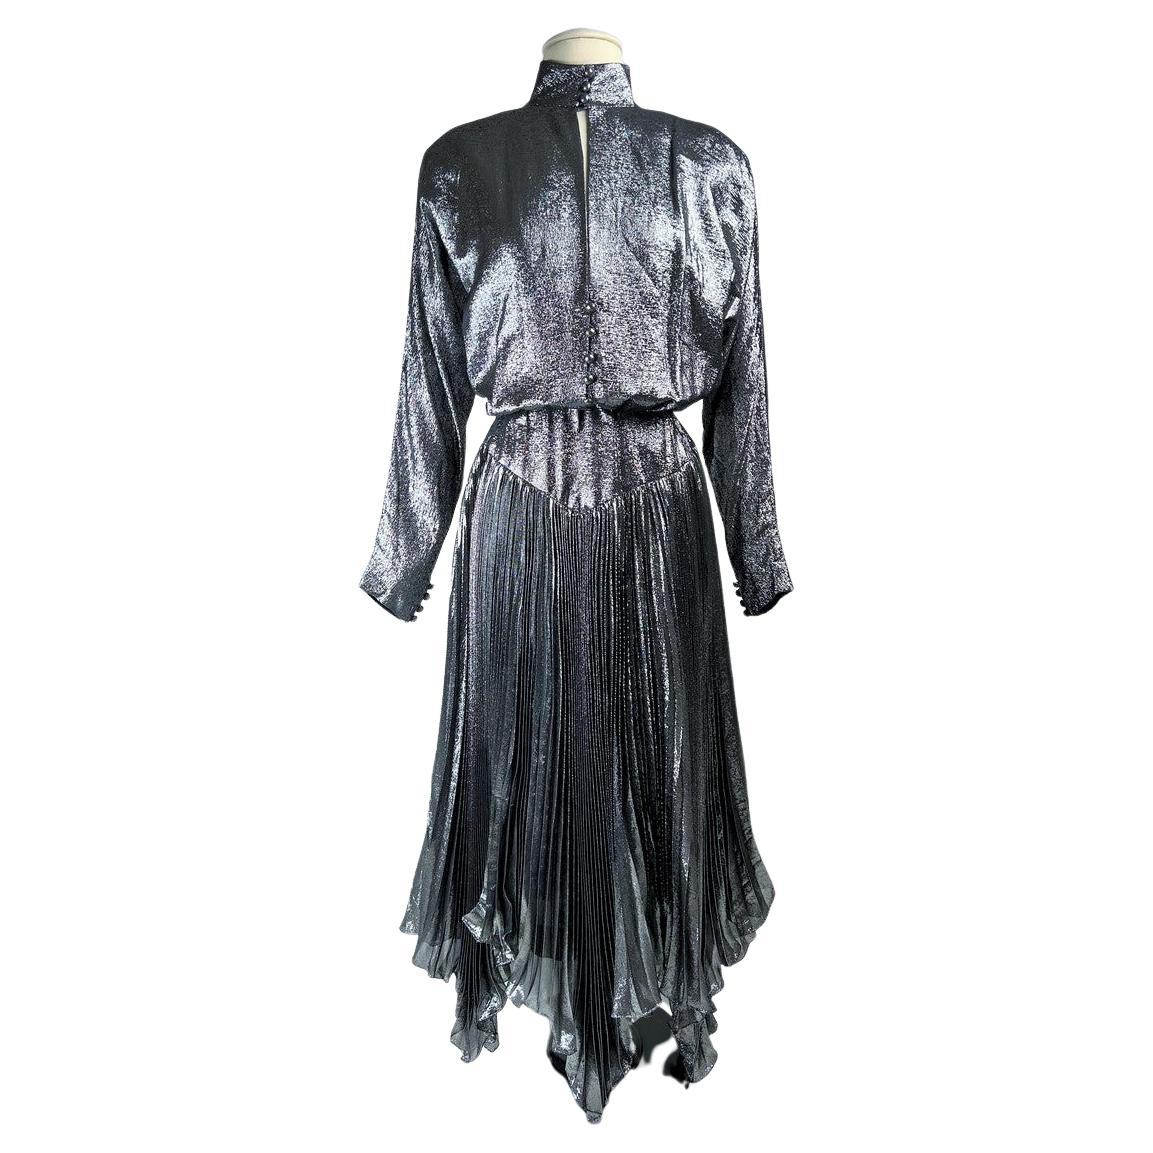 A Disco ball gown by Jean-Louis Scherrer in silver lamé n° 302451 Circa 1985 For Sale